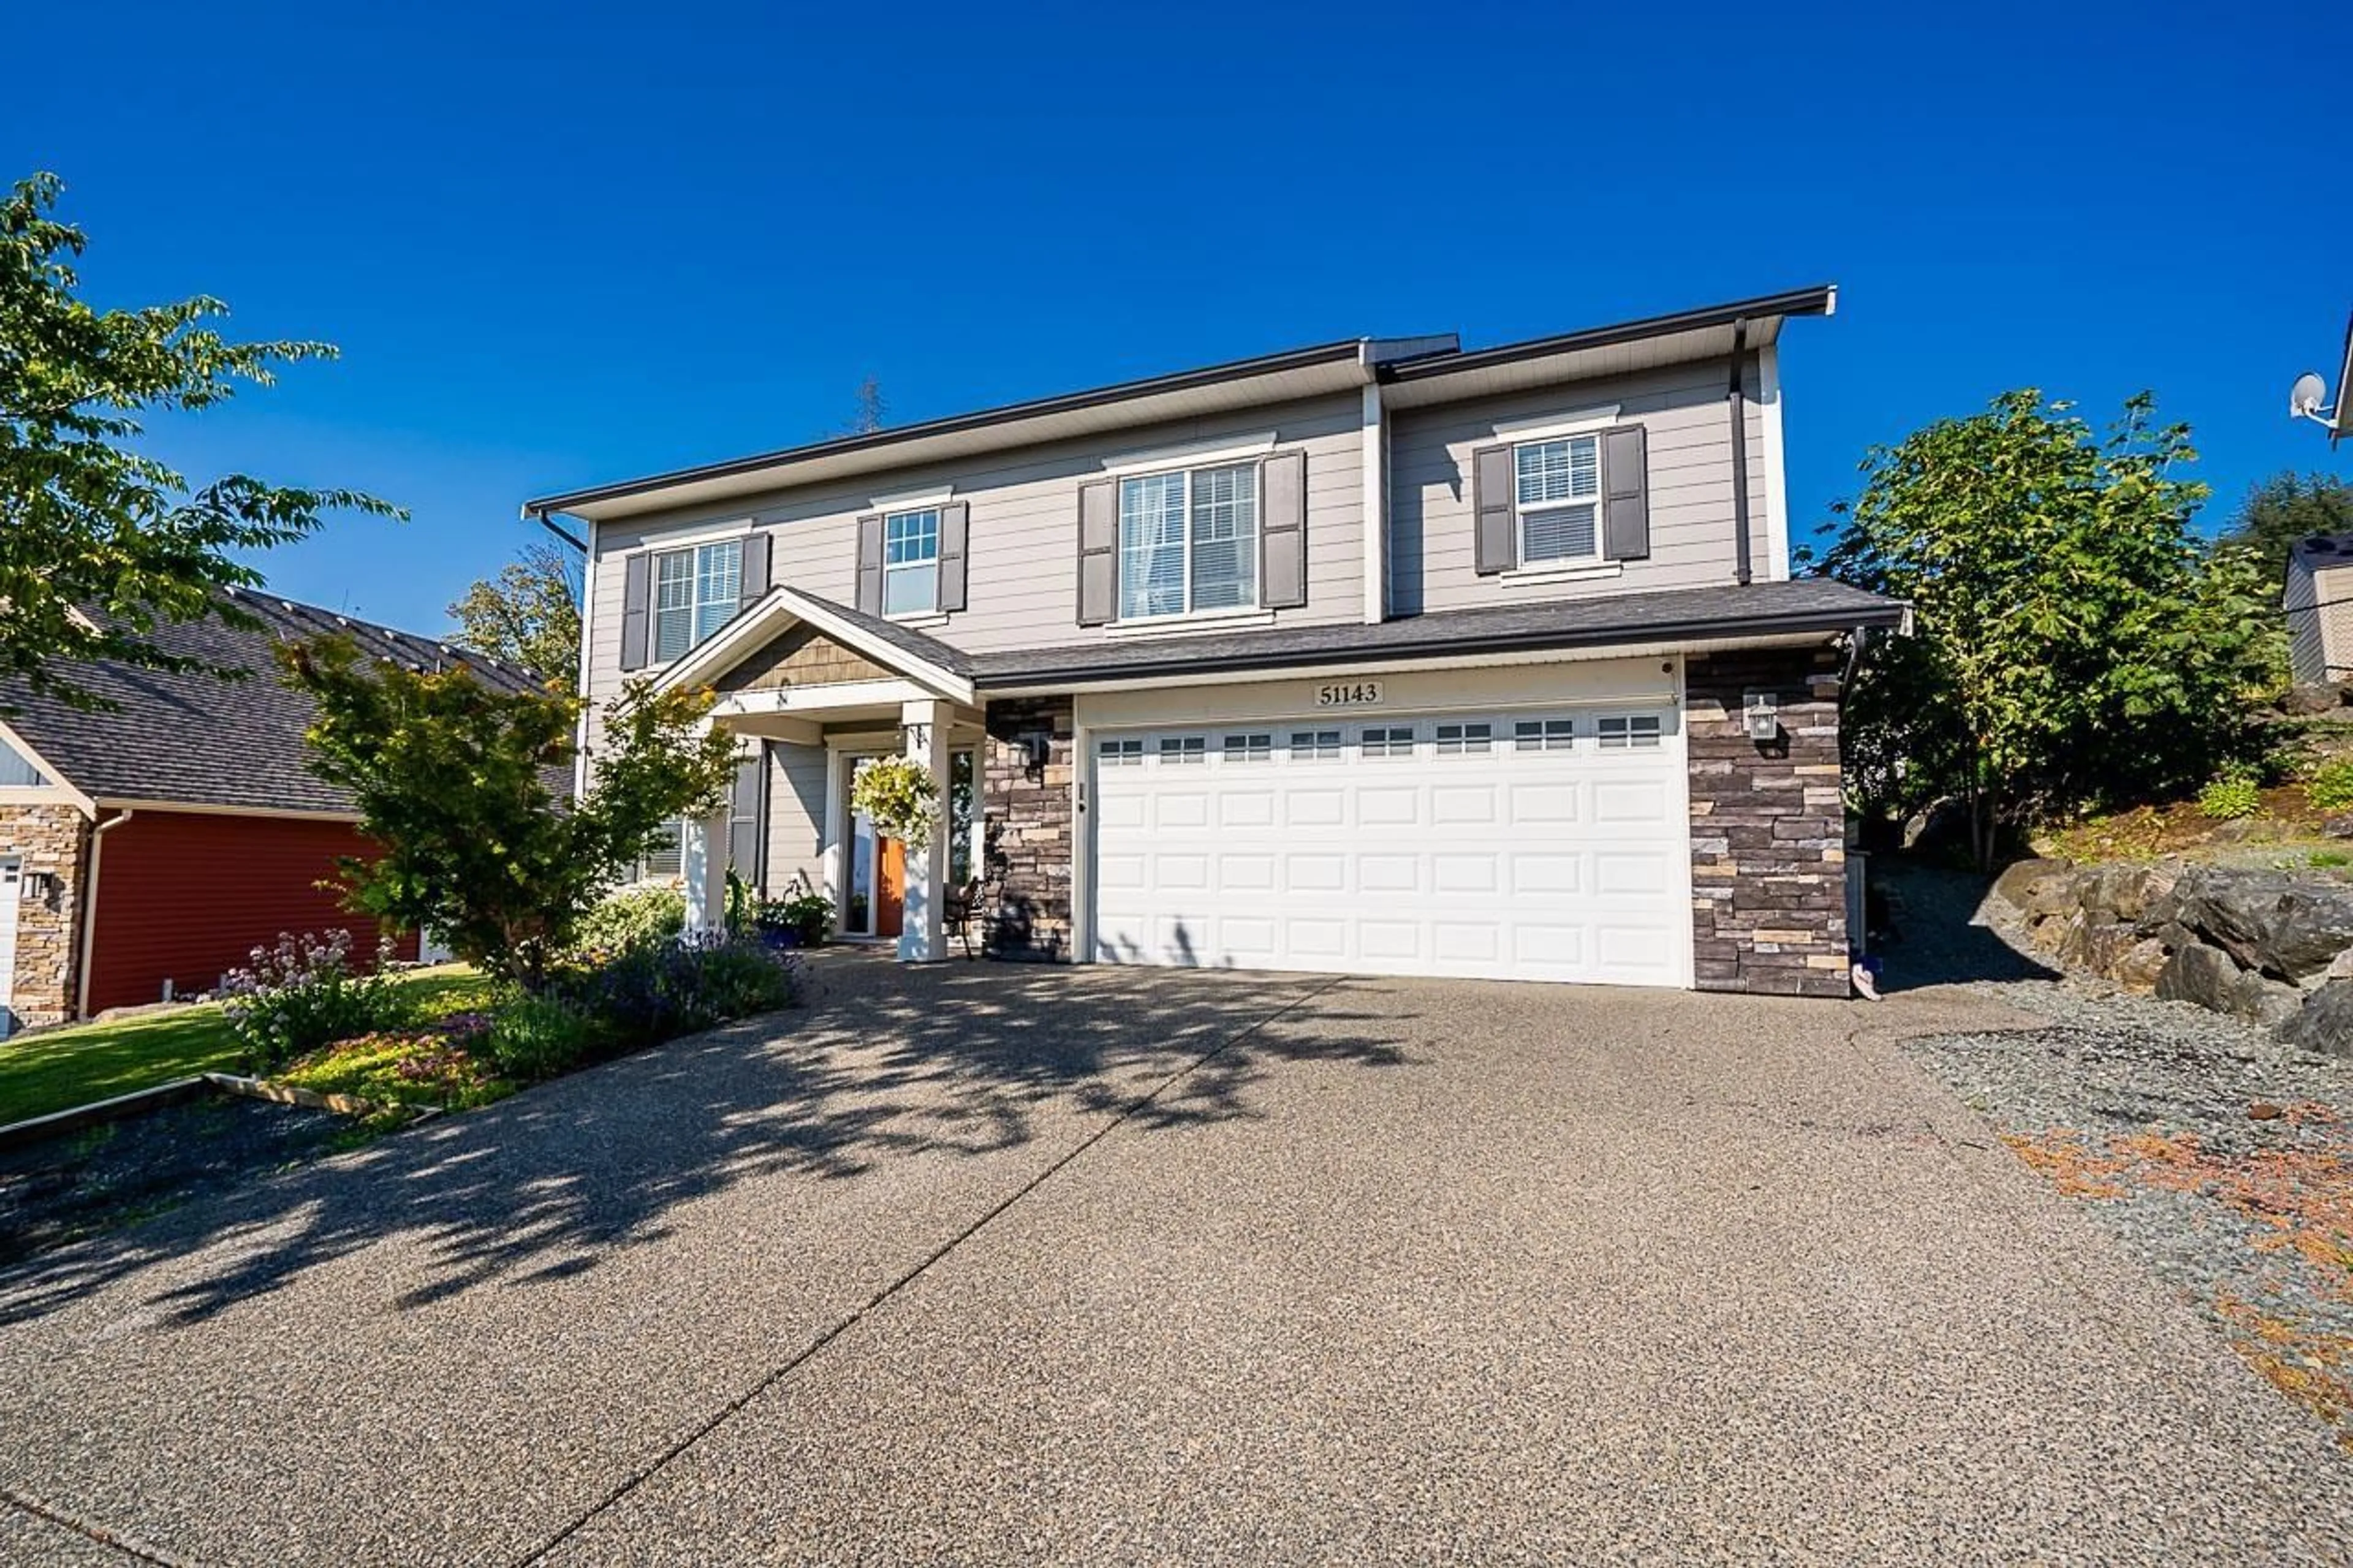 Home with vinyl exterior material for 51143 SOPHIE CRESCENT, Chilliwack British Columbia V4Z0C1